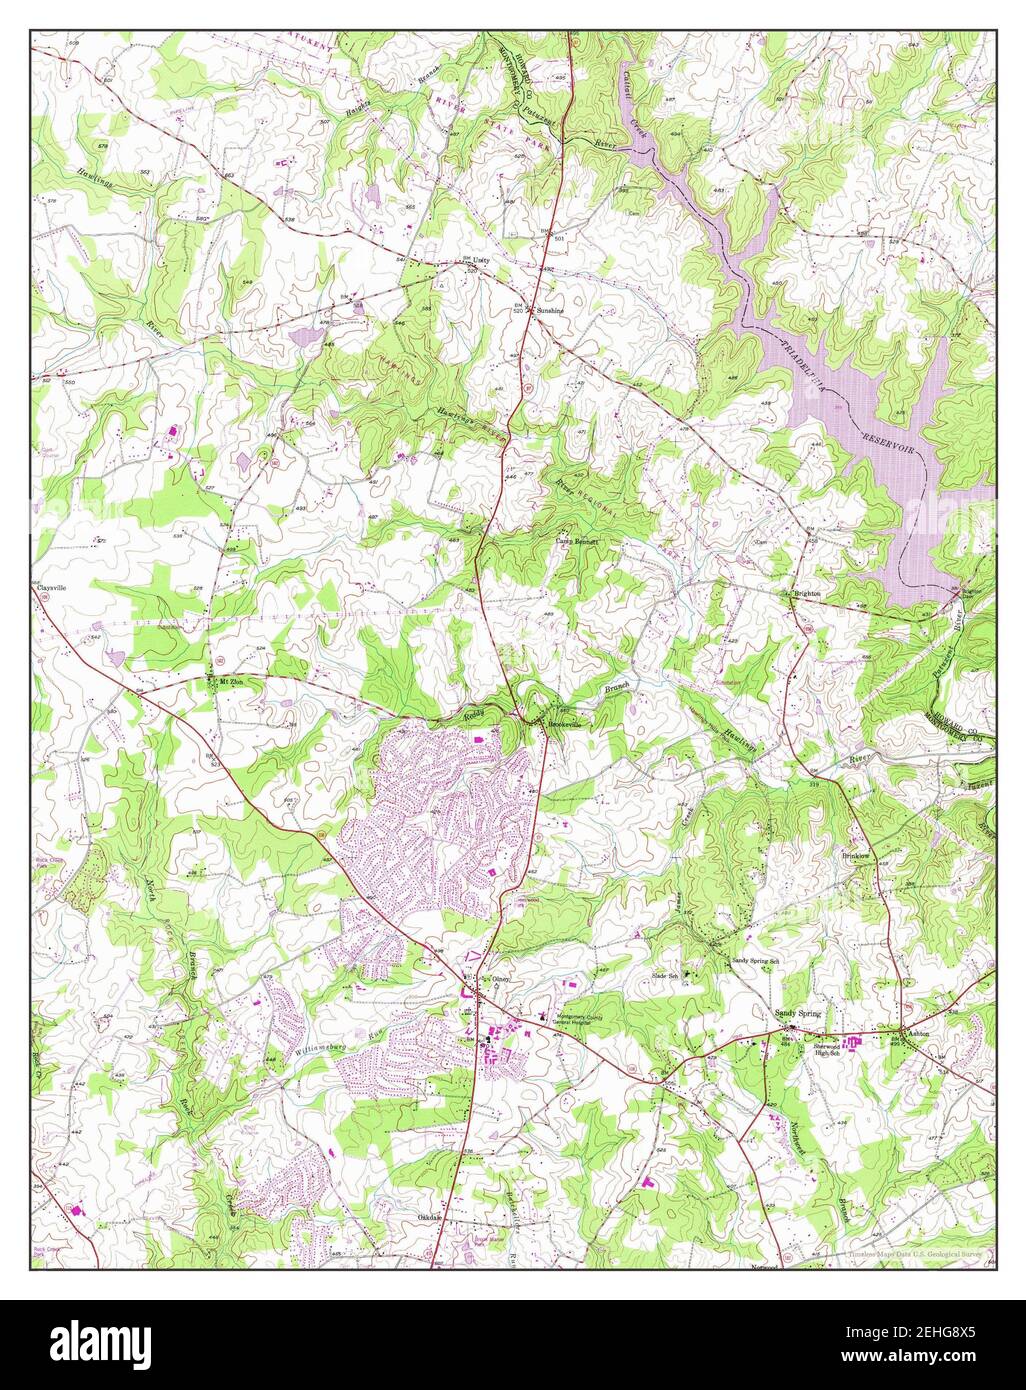 Sandy Spring, Maryland, map 1945, 1:24000, United States of America by Timeless Maps, data U.S. Geological Survey Stock Photo